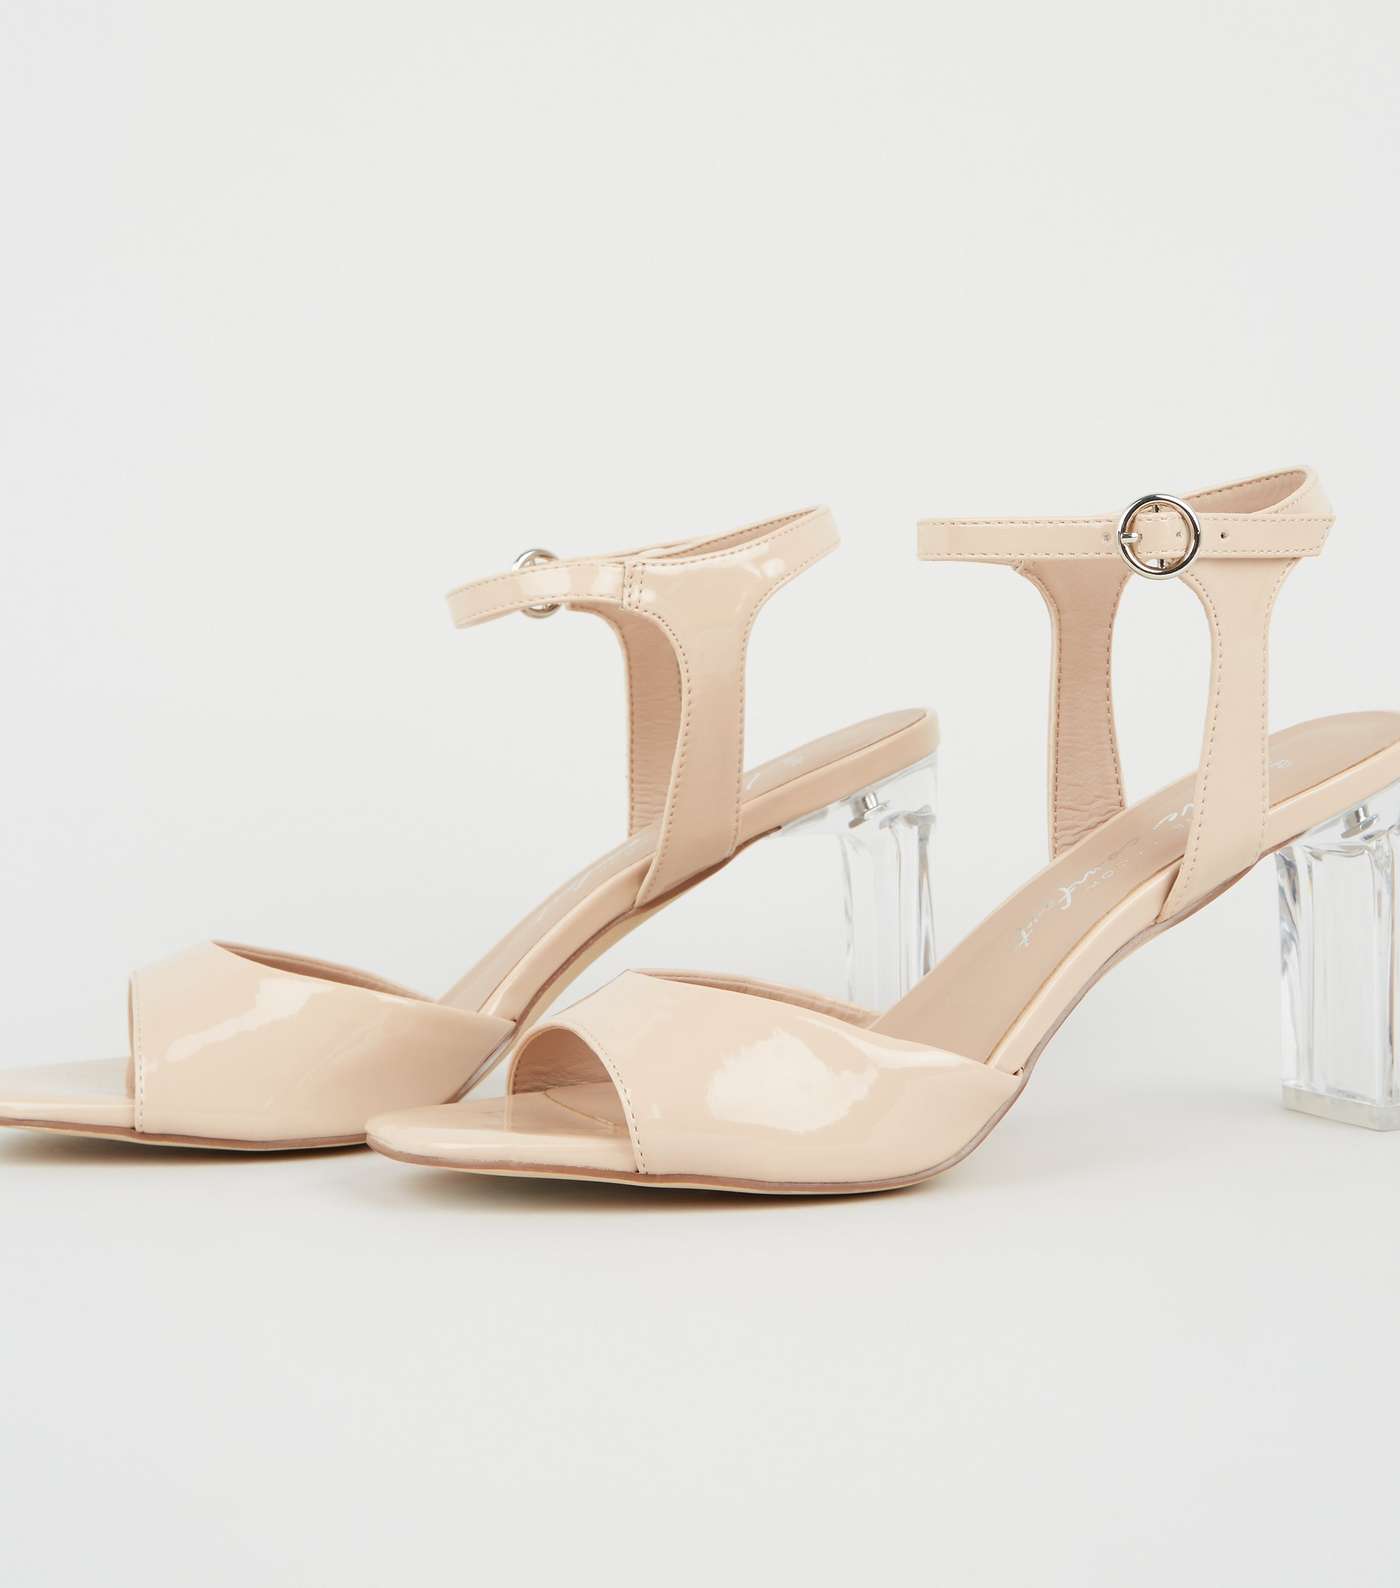 Wide Fit Cream Patent Clear Heel Sandals Image 3